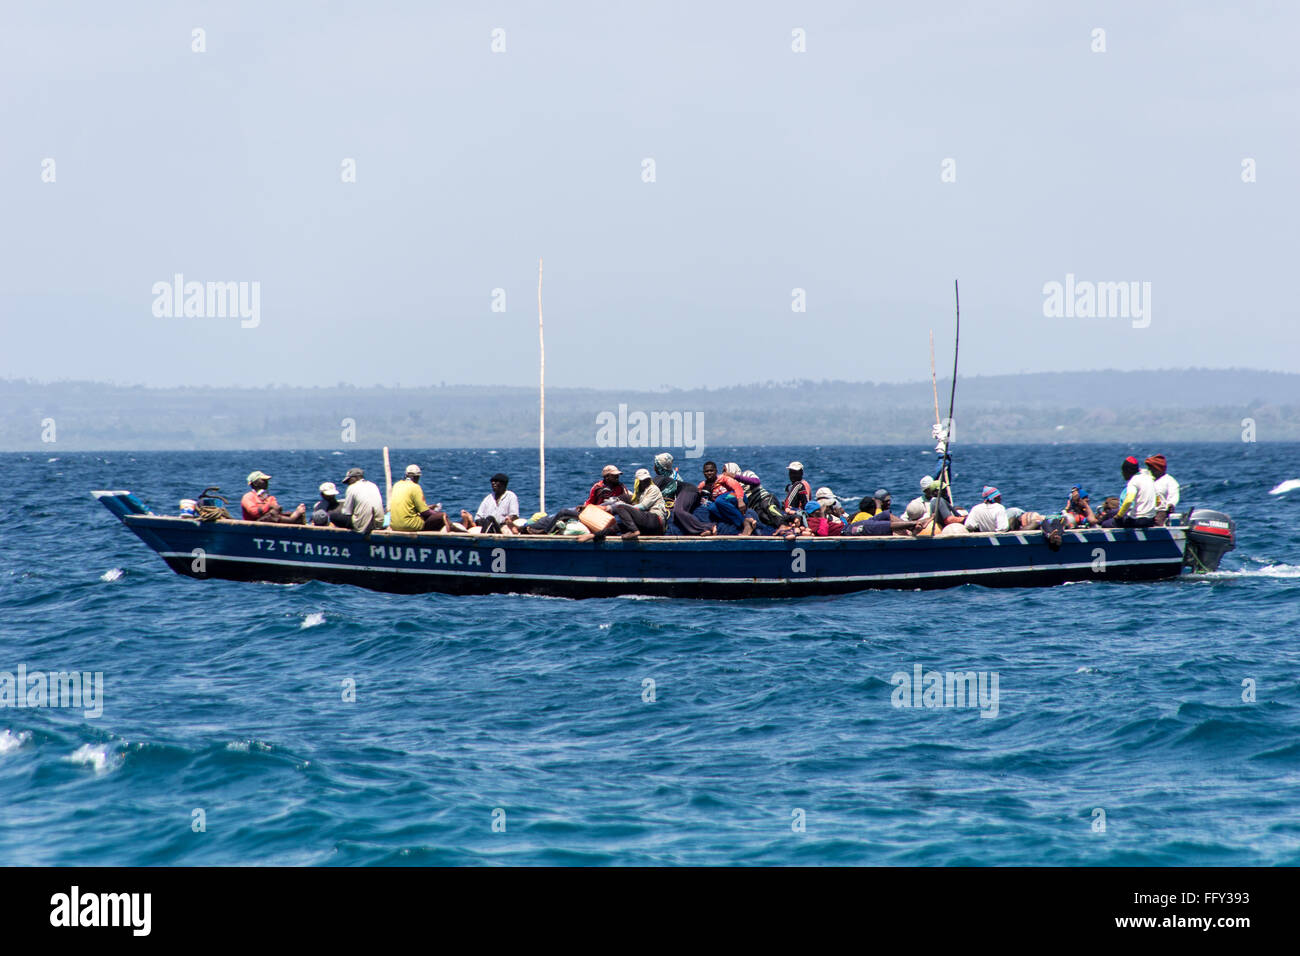 A crowded local fishing boat sailing in the Indian ocean, Tanzania, Africa Stock Photo